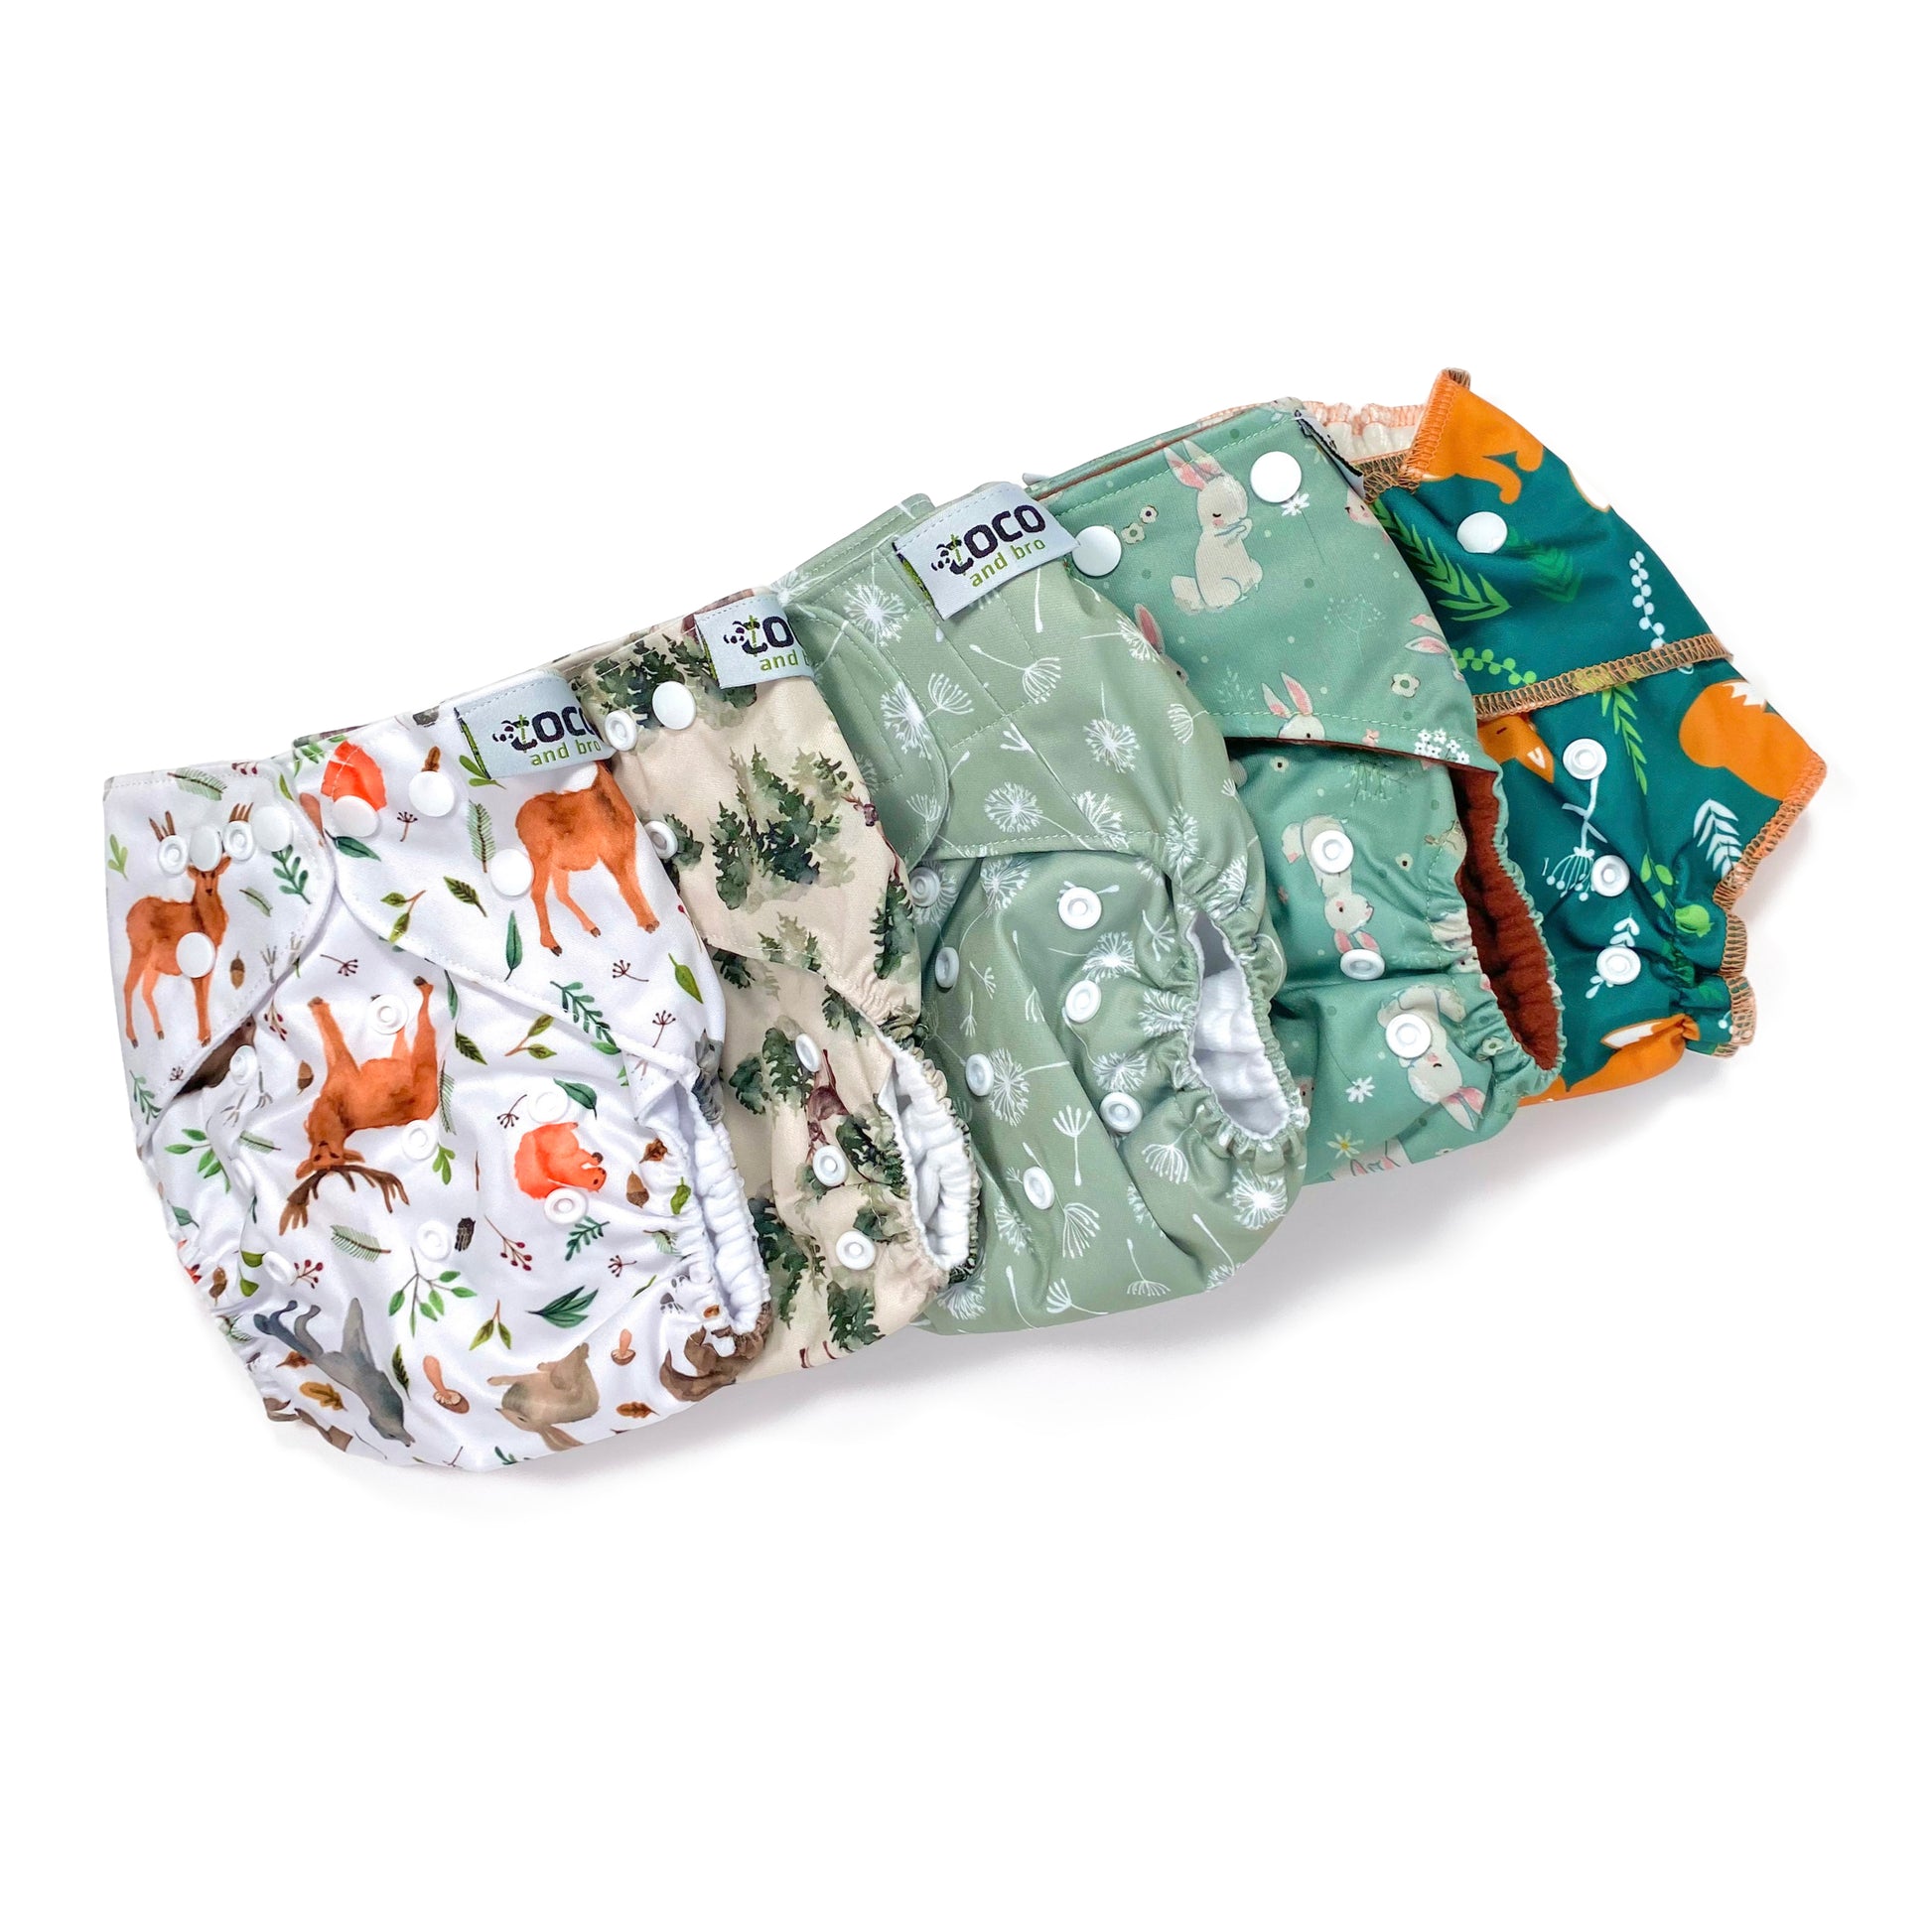 A set of five reusable nappies, made from 100% recycled polyester. The included nappies are: Woodland Friends, Winter Forest, Green Dandelion, Green Rabbits and Green Fox. View shows all five nappies front facing, in a diagonal line.